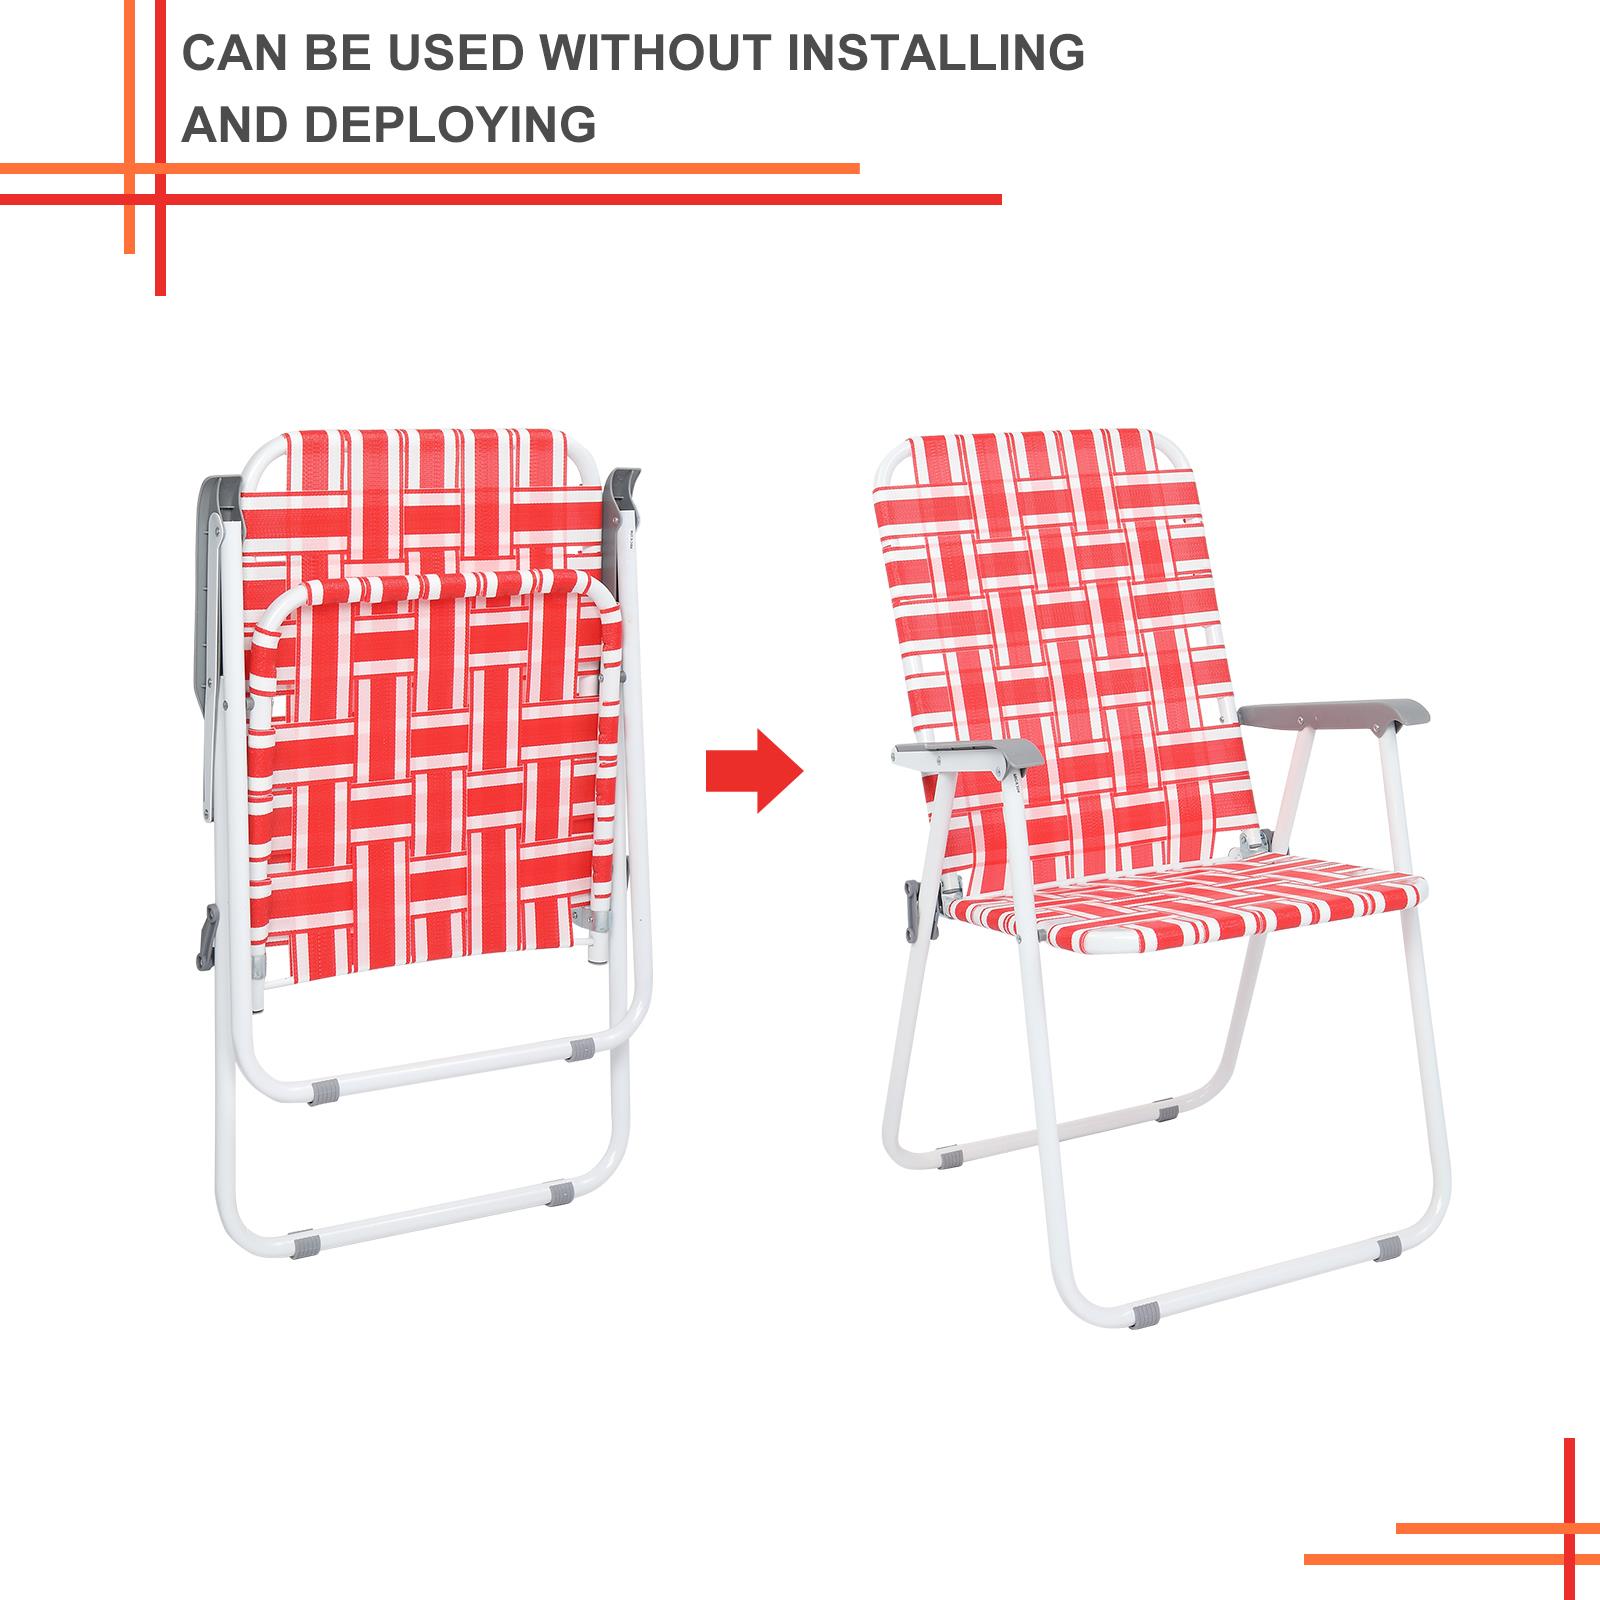 SamyoHome 2 Pack Lawn Chair Set Patio Folding Web Outdoor Portable Camping Chair(Red & White) - image 4 of 6